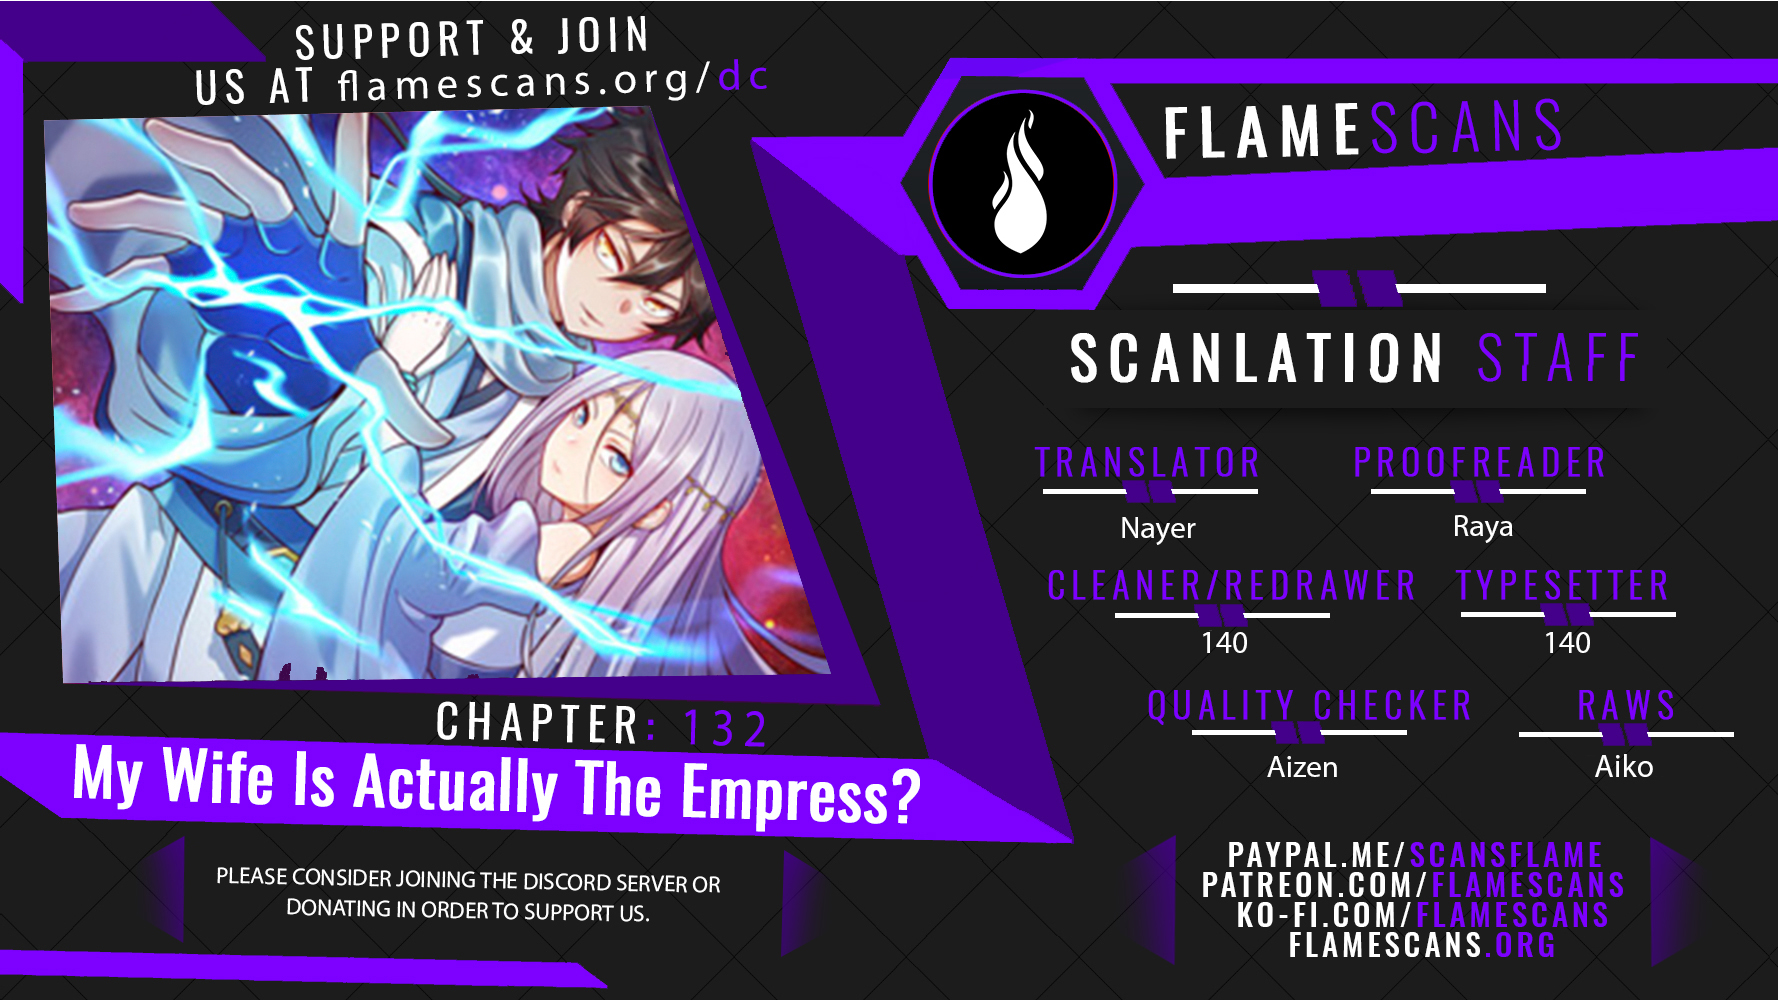 My Wife Is Actually The Empress? - Chapter 30292 - Image 1